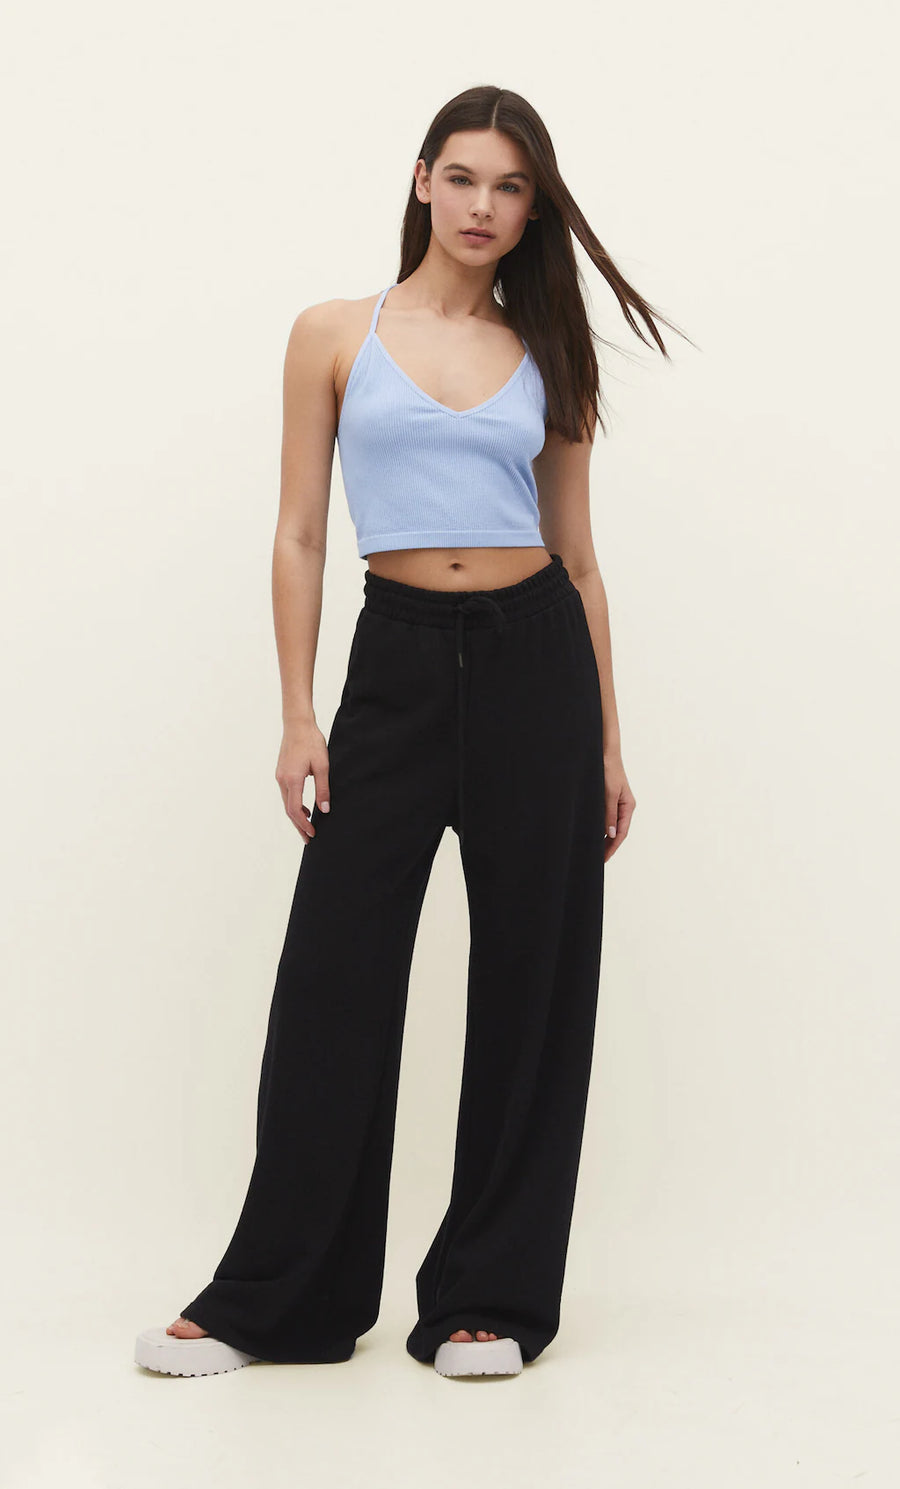 2023 Spring/Summer Womens Versatile Casual Wide Leg Blaack Wide Trousers  Women In Solid Colors From Daboluomi, $12.04 | DHgate.Com